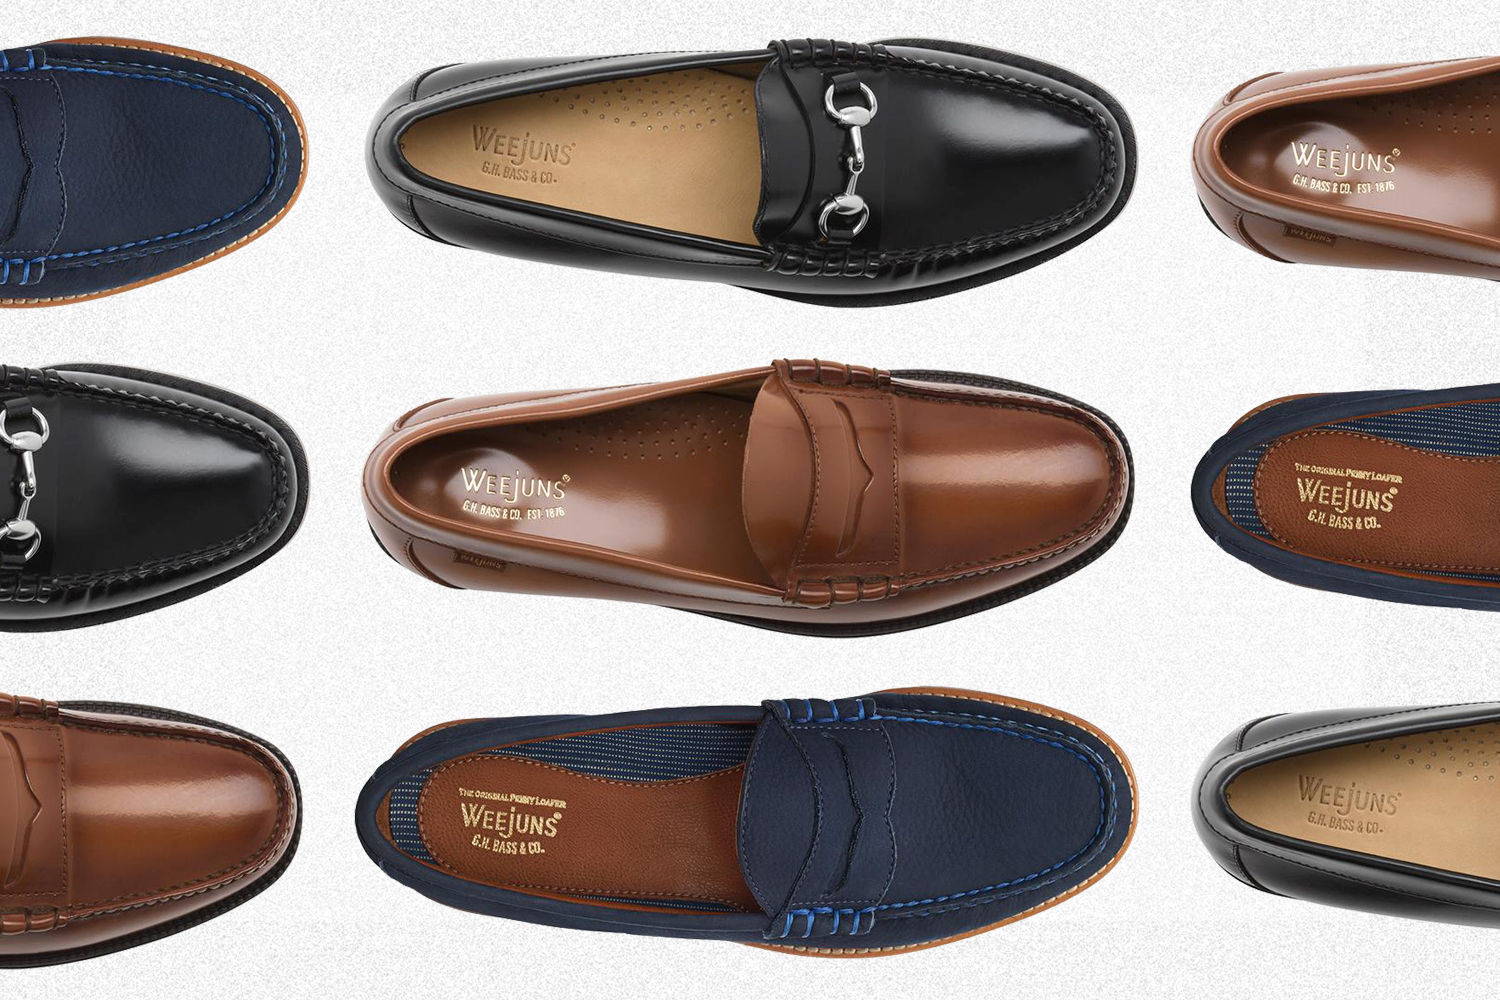 lektier vakuum Fearless Take Up to 60% Off Weejuns Loafers at G.H. Bass & Co. - InsideHook